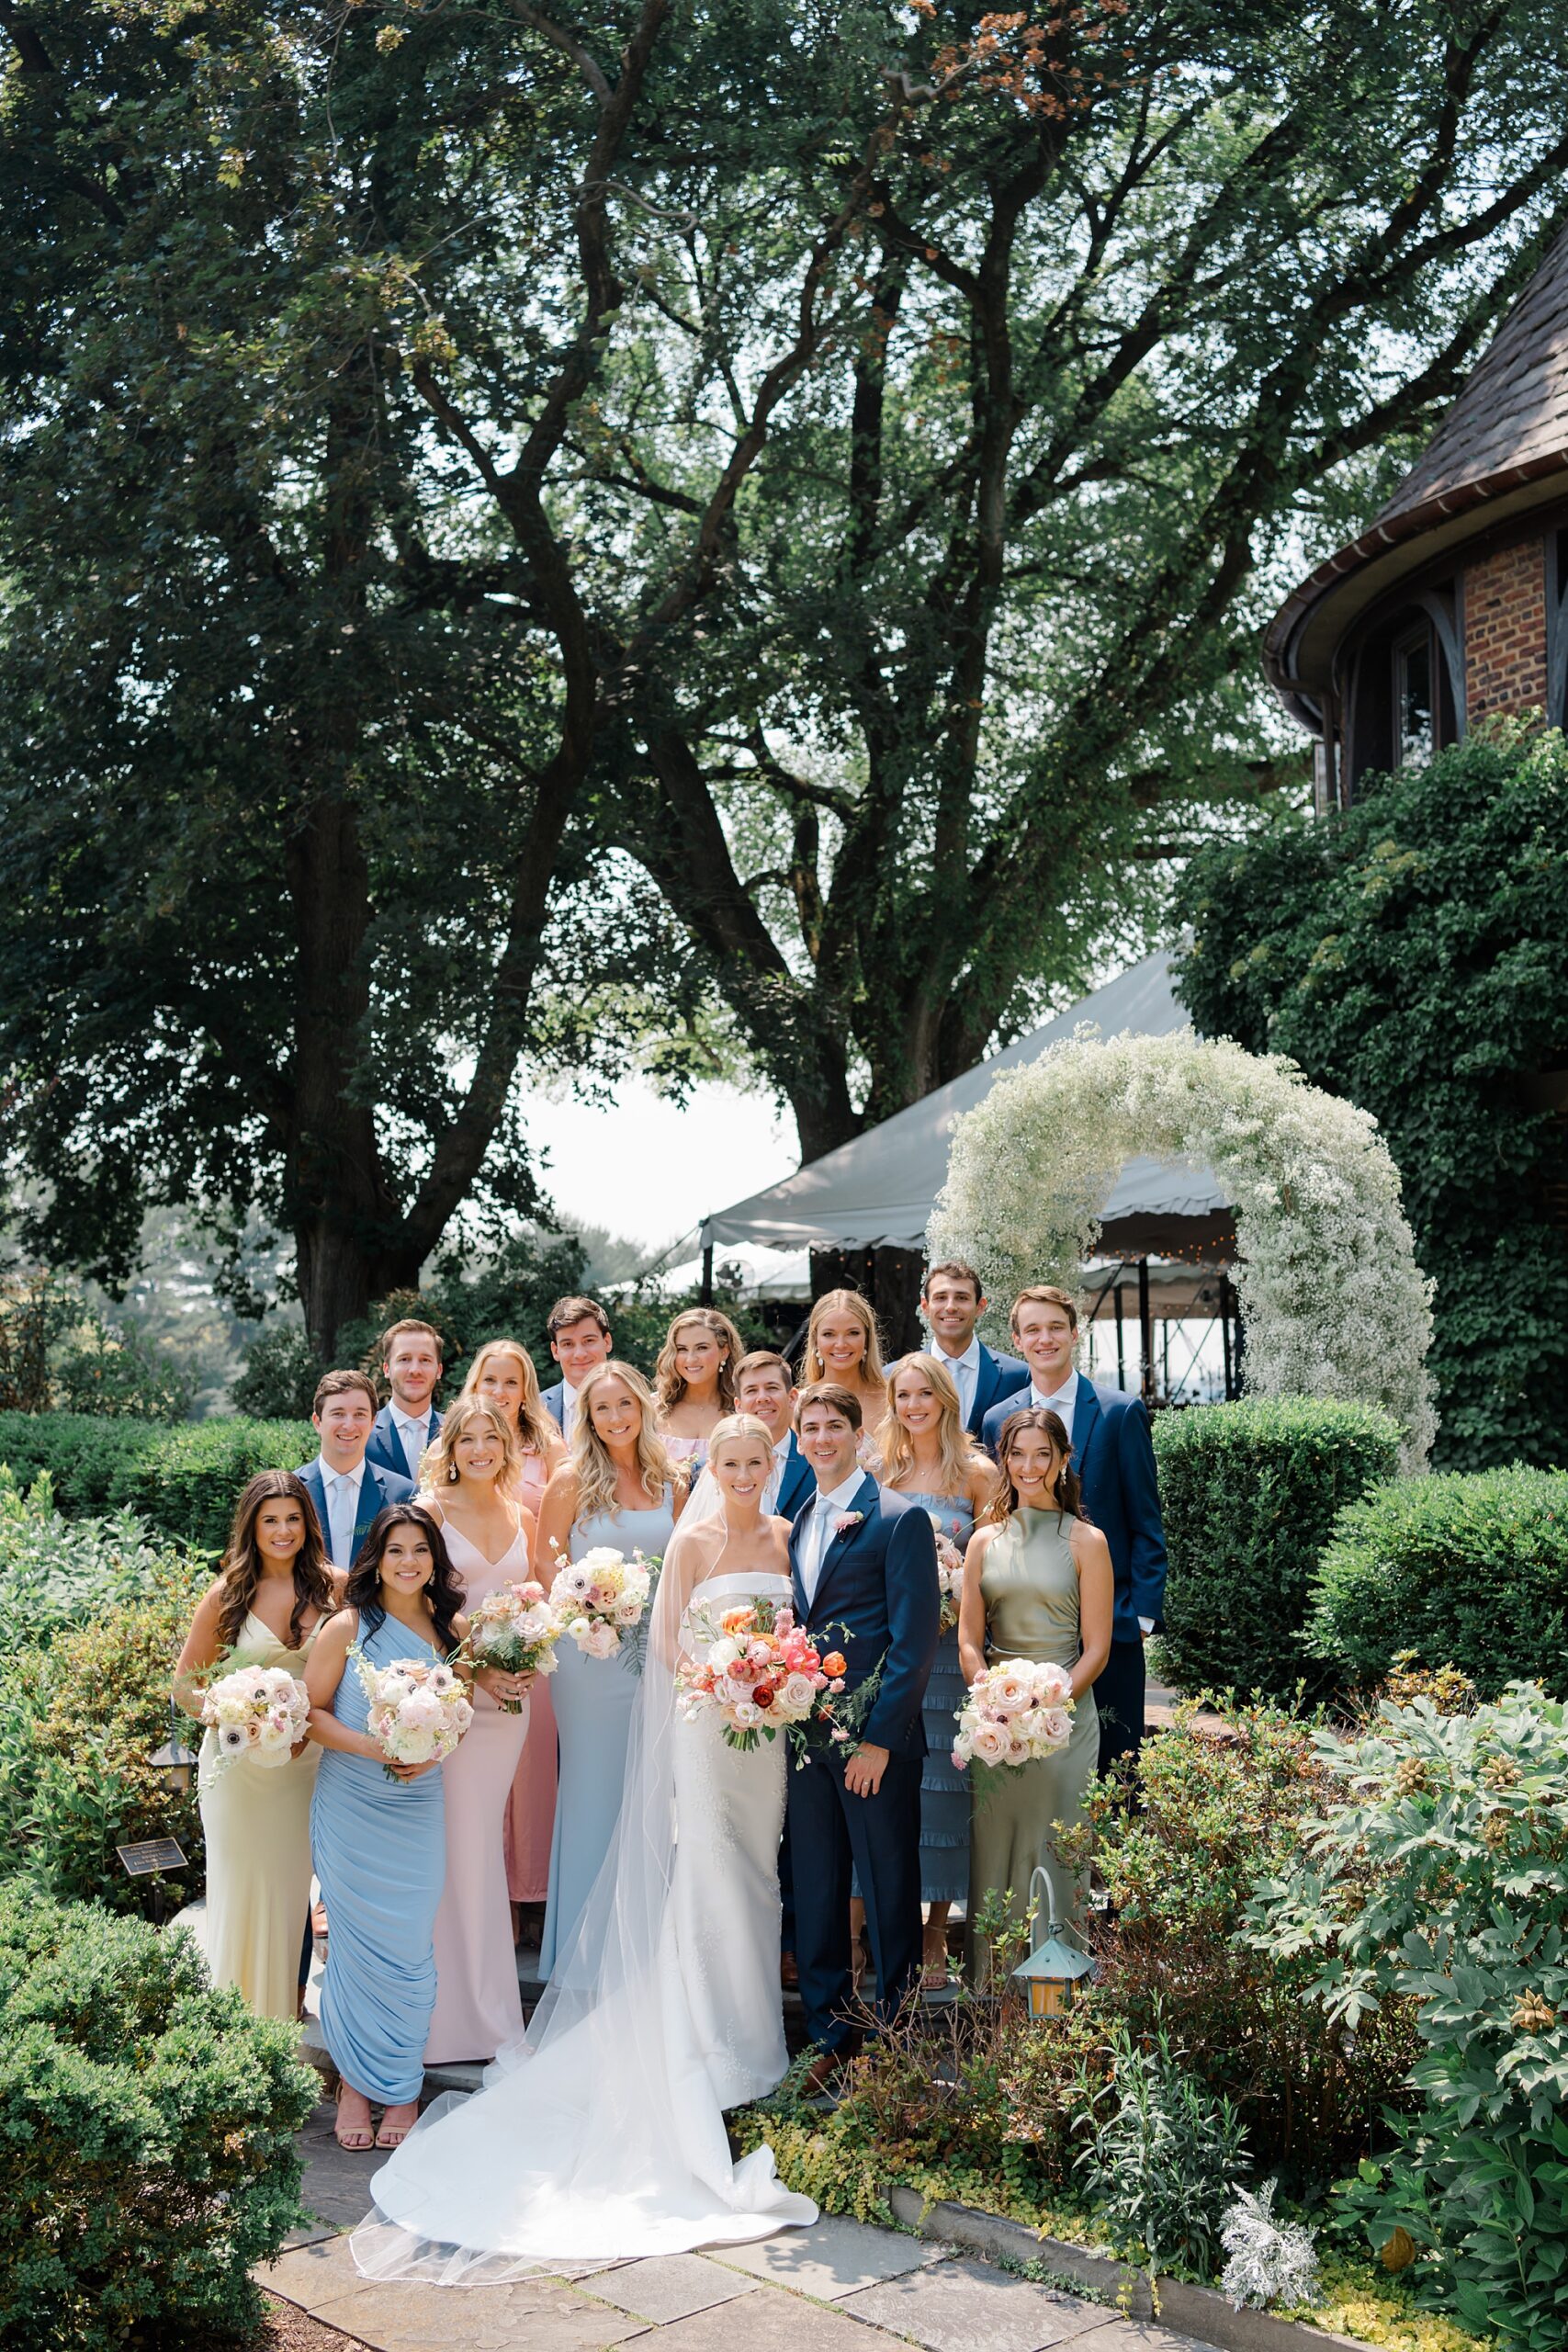 wedding party portraits from Garden Summer Wedding at Greenville Country Club in Wilmington, DE